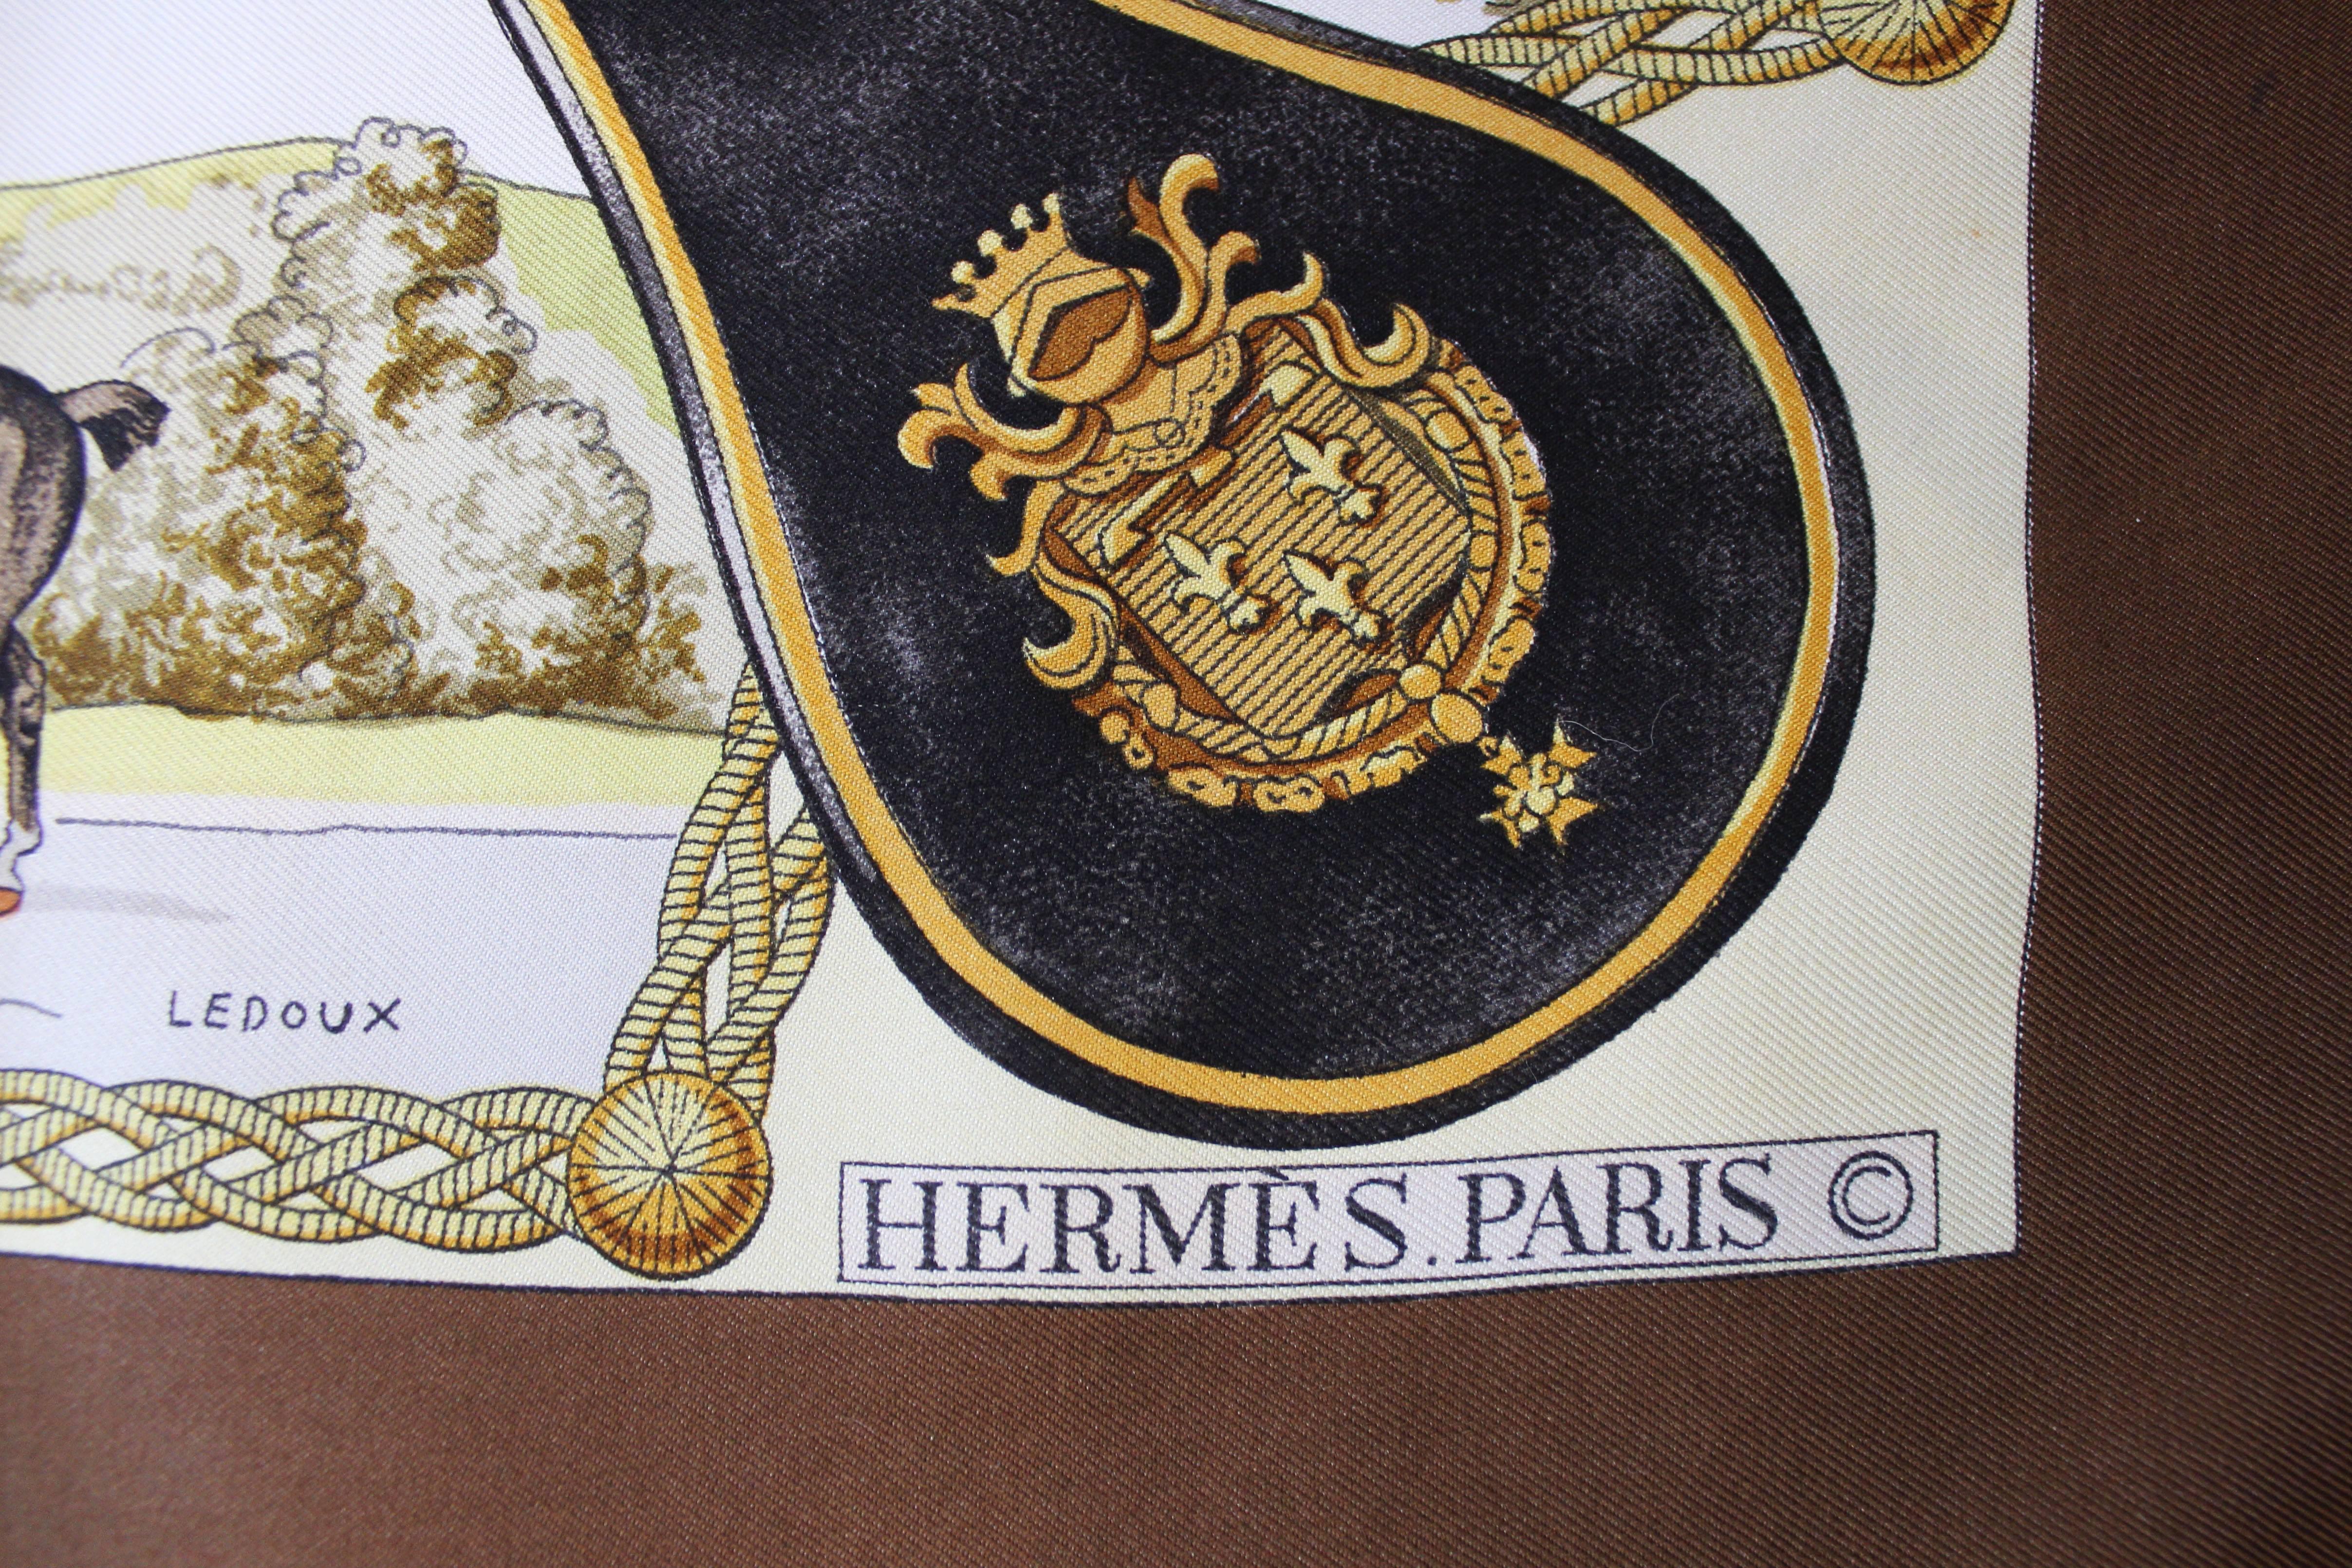 Another silk scarf by French house Hermes, the silk is of a superior quality and the edges are hand rolled. This design was first introduced in 1937.